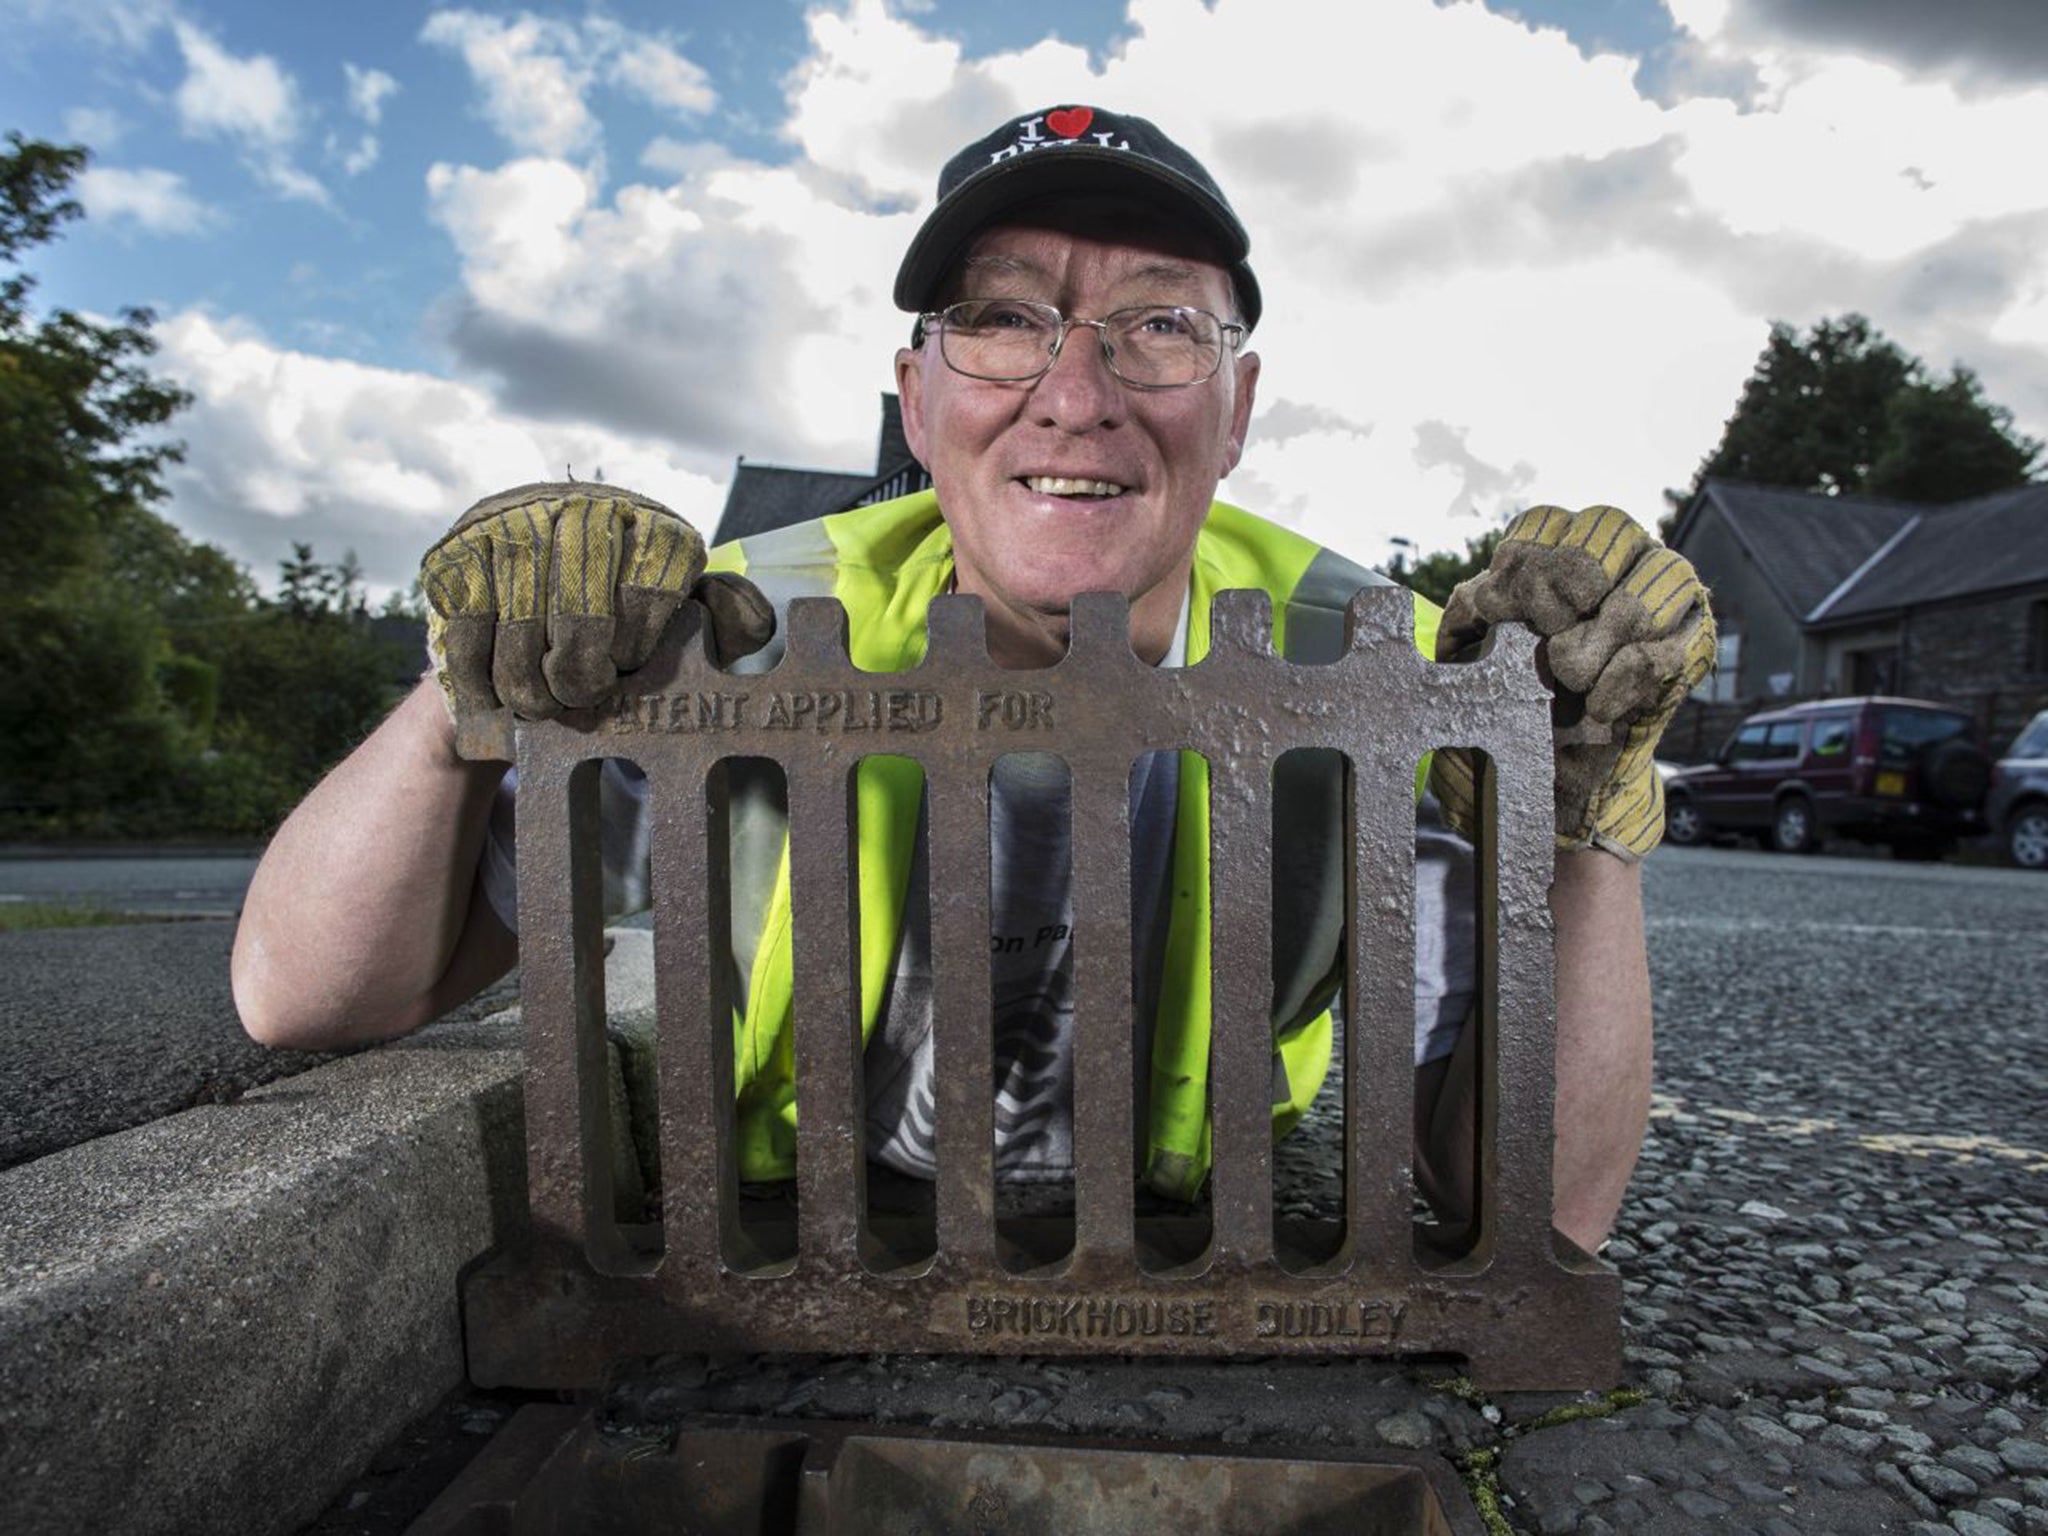 Archie Workman became a drainspotter after being given the task of inspecting grids by his parish council